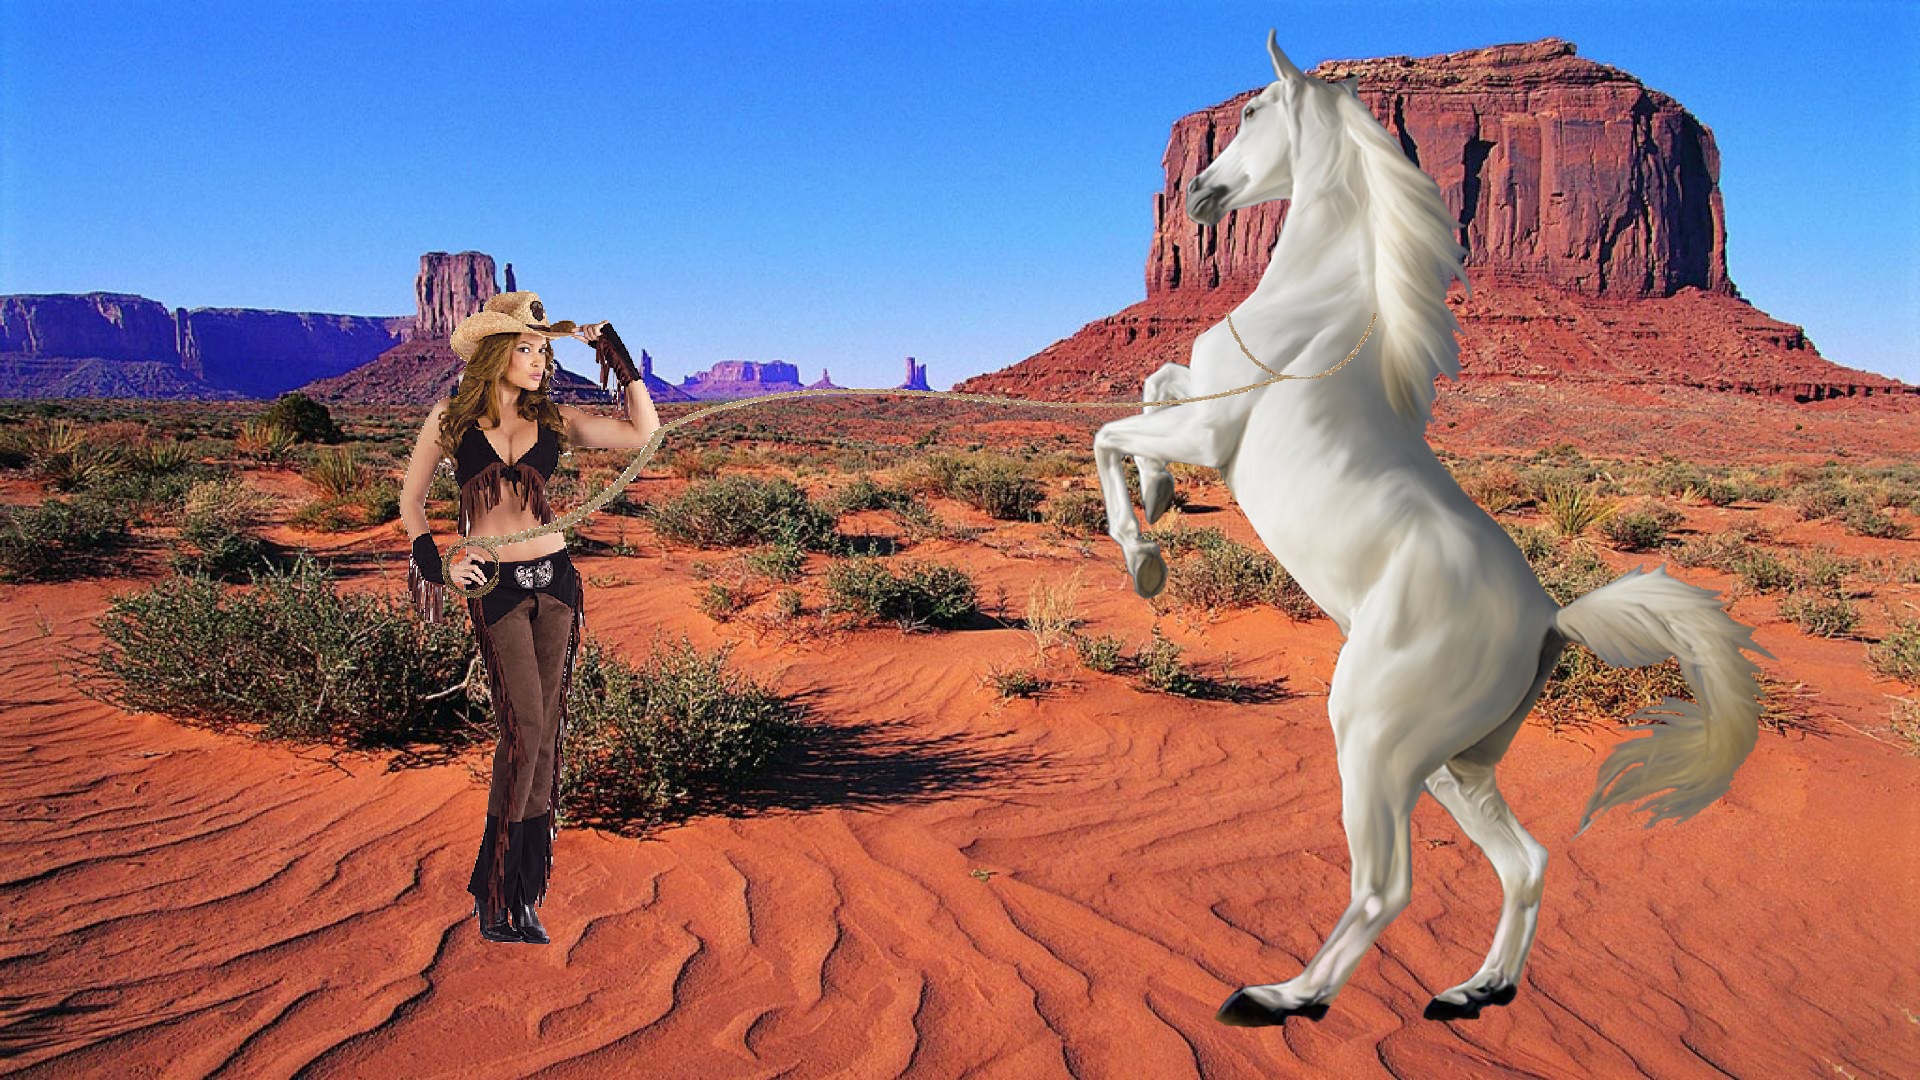 Hot cowgirl tamed a beautiful wild white horse - Cowgirls Fan Art ...